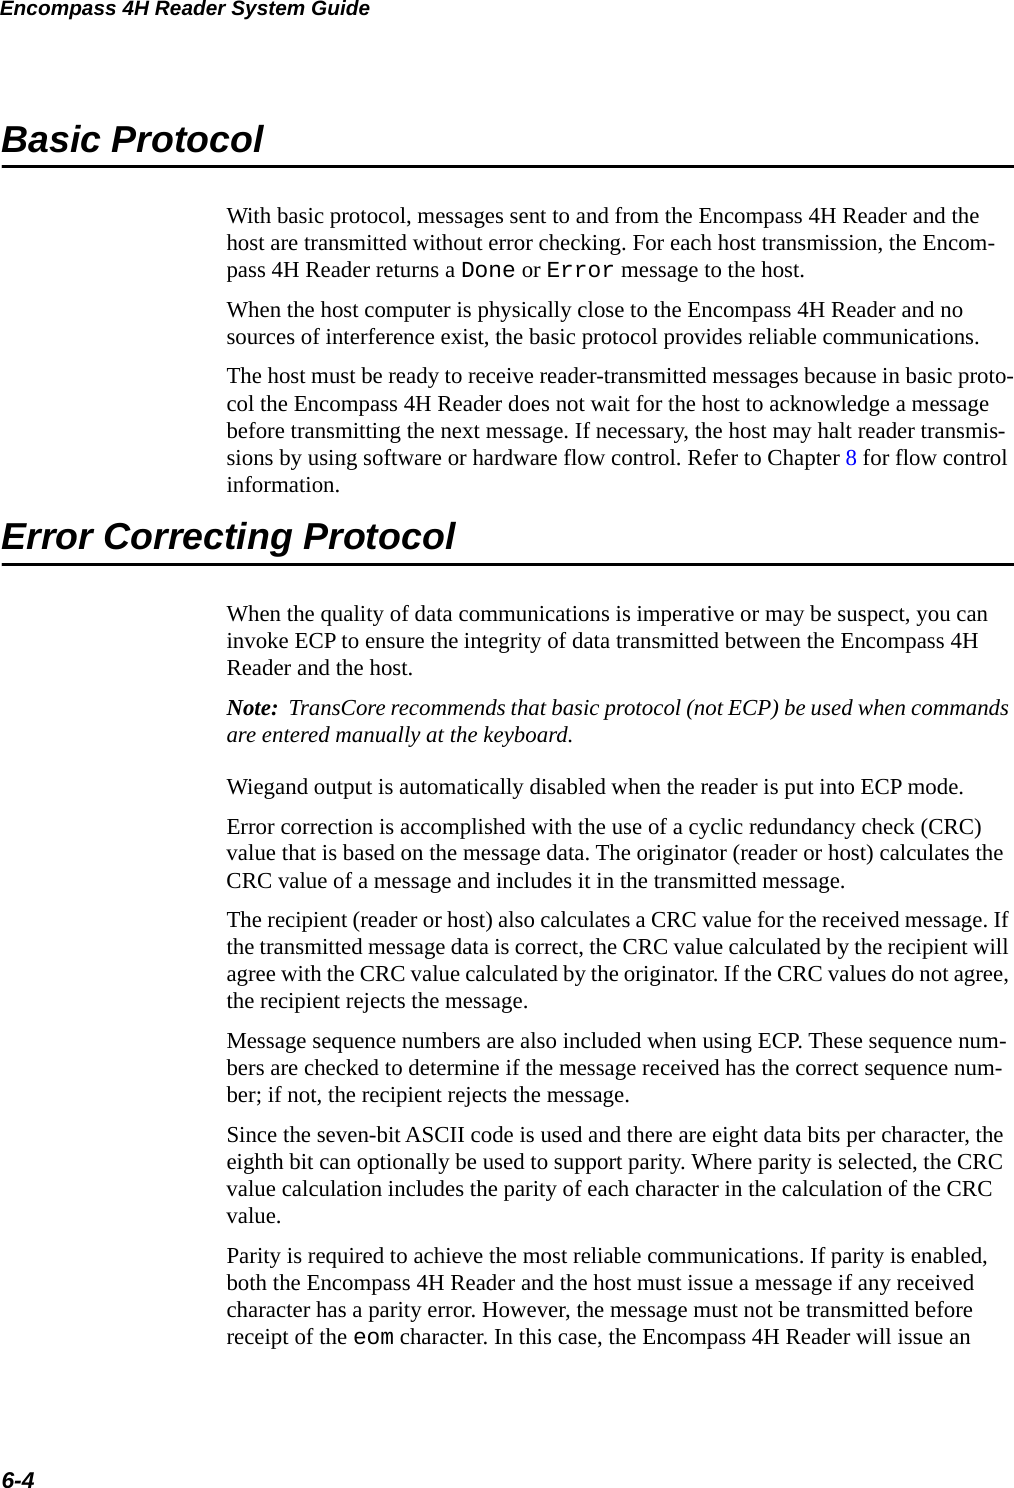 Encompass 4H Reader System Guide6-4Basic ProtocolWith basic protocol, messages sent to and from the Encompass 4H Reader and the host are transmitted without error checking. For each host transmission, the Encom-pass 4H Reader returns a Done or Error message to the host.When the host computer is physically close to the Encompass 4H Reader and no sources of interference exist, the basic protocol provides reliable communications.The host must be ready to receive reader-transmitted messages because in basic proto-col the Encompass 4H Reader does not wait for the host to acknowledge a message before transmitting the next message. If necessary, the host may halt reader transmis-sions by using software or hardware flow control. Refer to Chapter 8 for flow control information.Error Correcting ProtocolWhen the quality of data communications is imperative or may be suspect, you can invoke ECP to ensure the integrity of data transmitted between the Encompass 4H Reader and the host. Note:  TransCore recommends that basic protocol (not ECP) be used when commands are entered manually at the keyboard.Wiegand output is automatically disabled when the reader is put into ECP mode.Error correction is accomplished with the use of a cyclic redundancy check (CRC) value that is based on the message data. The originator (reader or host) calculates the CRC value of a message and includes it in the transmitted message.The recipient (reader or host) also calculates a CRC value for the received message. If the transmitted message data is correct, the CRC value calculated by the recipient will agree with the CRC value calculated by the originator. If the CRC values do not agree, the recipient rejects the message.Message sequence numbers are also included when using ECP. These sequence num-bers are checked to determine if the message received has the correct sequence num-ber; if not, the recipient rejects the message.Since the seven-bit ASCII code is used and there are eight data bits per character, the eighth bit can optionally be used to support parity. Where parity is selected, the CRC value calculation includes the parity of each character in the calculation of the CRC value.Parity is required to achieve the most reliable communications. If parity is enabled, both the Encompass 4H Reader and the host must issue a message if any received character has a parity error. However, the message must not be transmitted before receipt of the eom character. In this case, the Encompass 4H Reader will issue an 